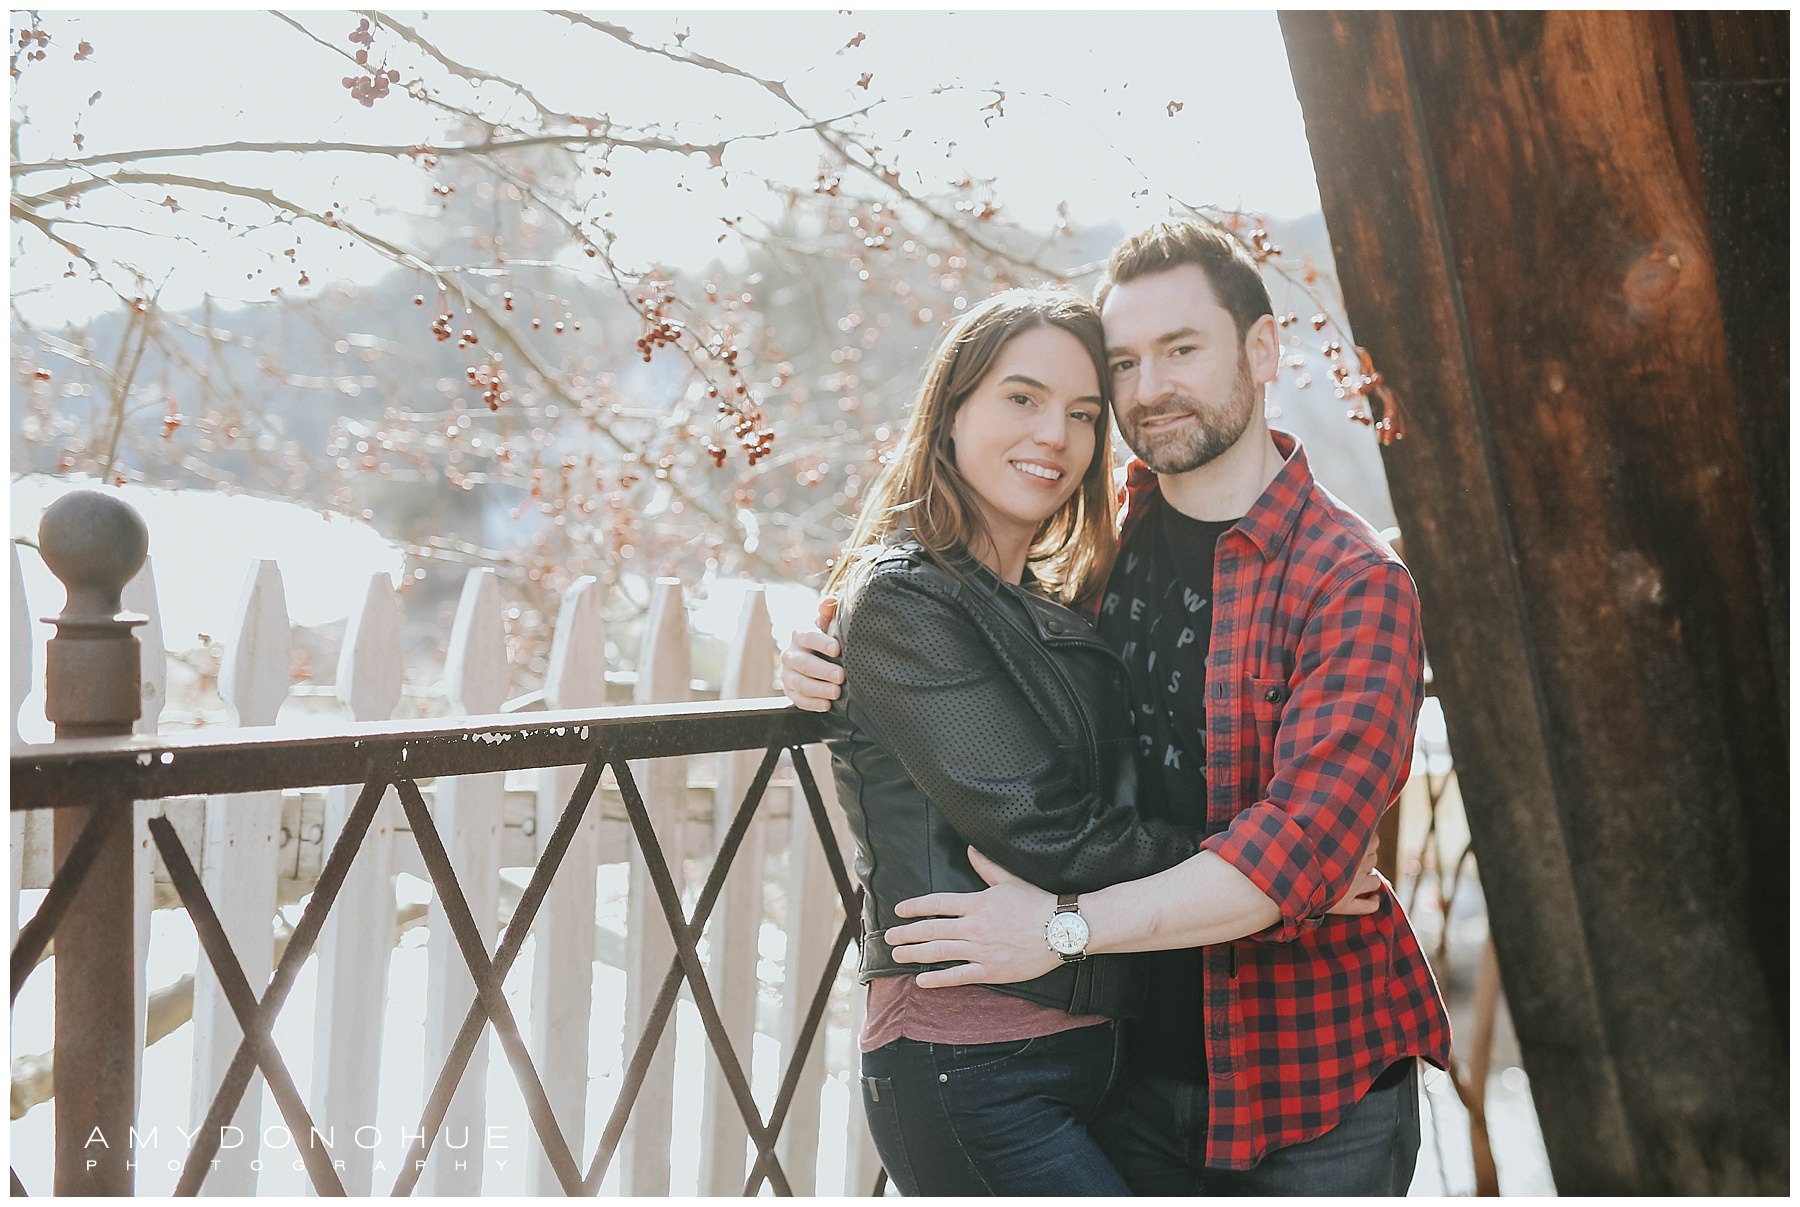 Covered Bridge Engagement Portraits in Woodstock, Vermont | © Amy Donohue Photography